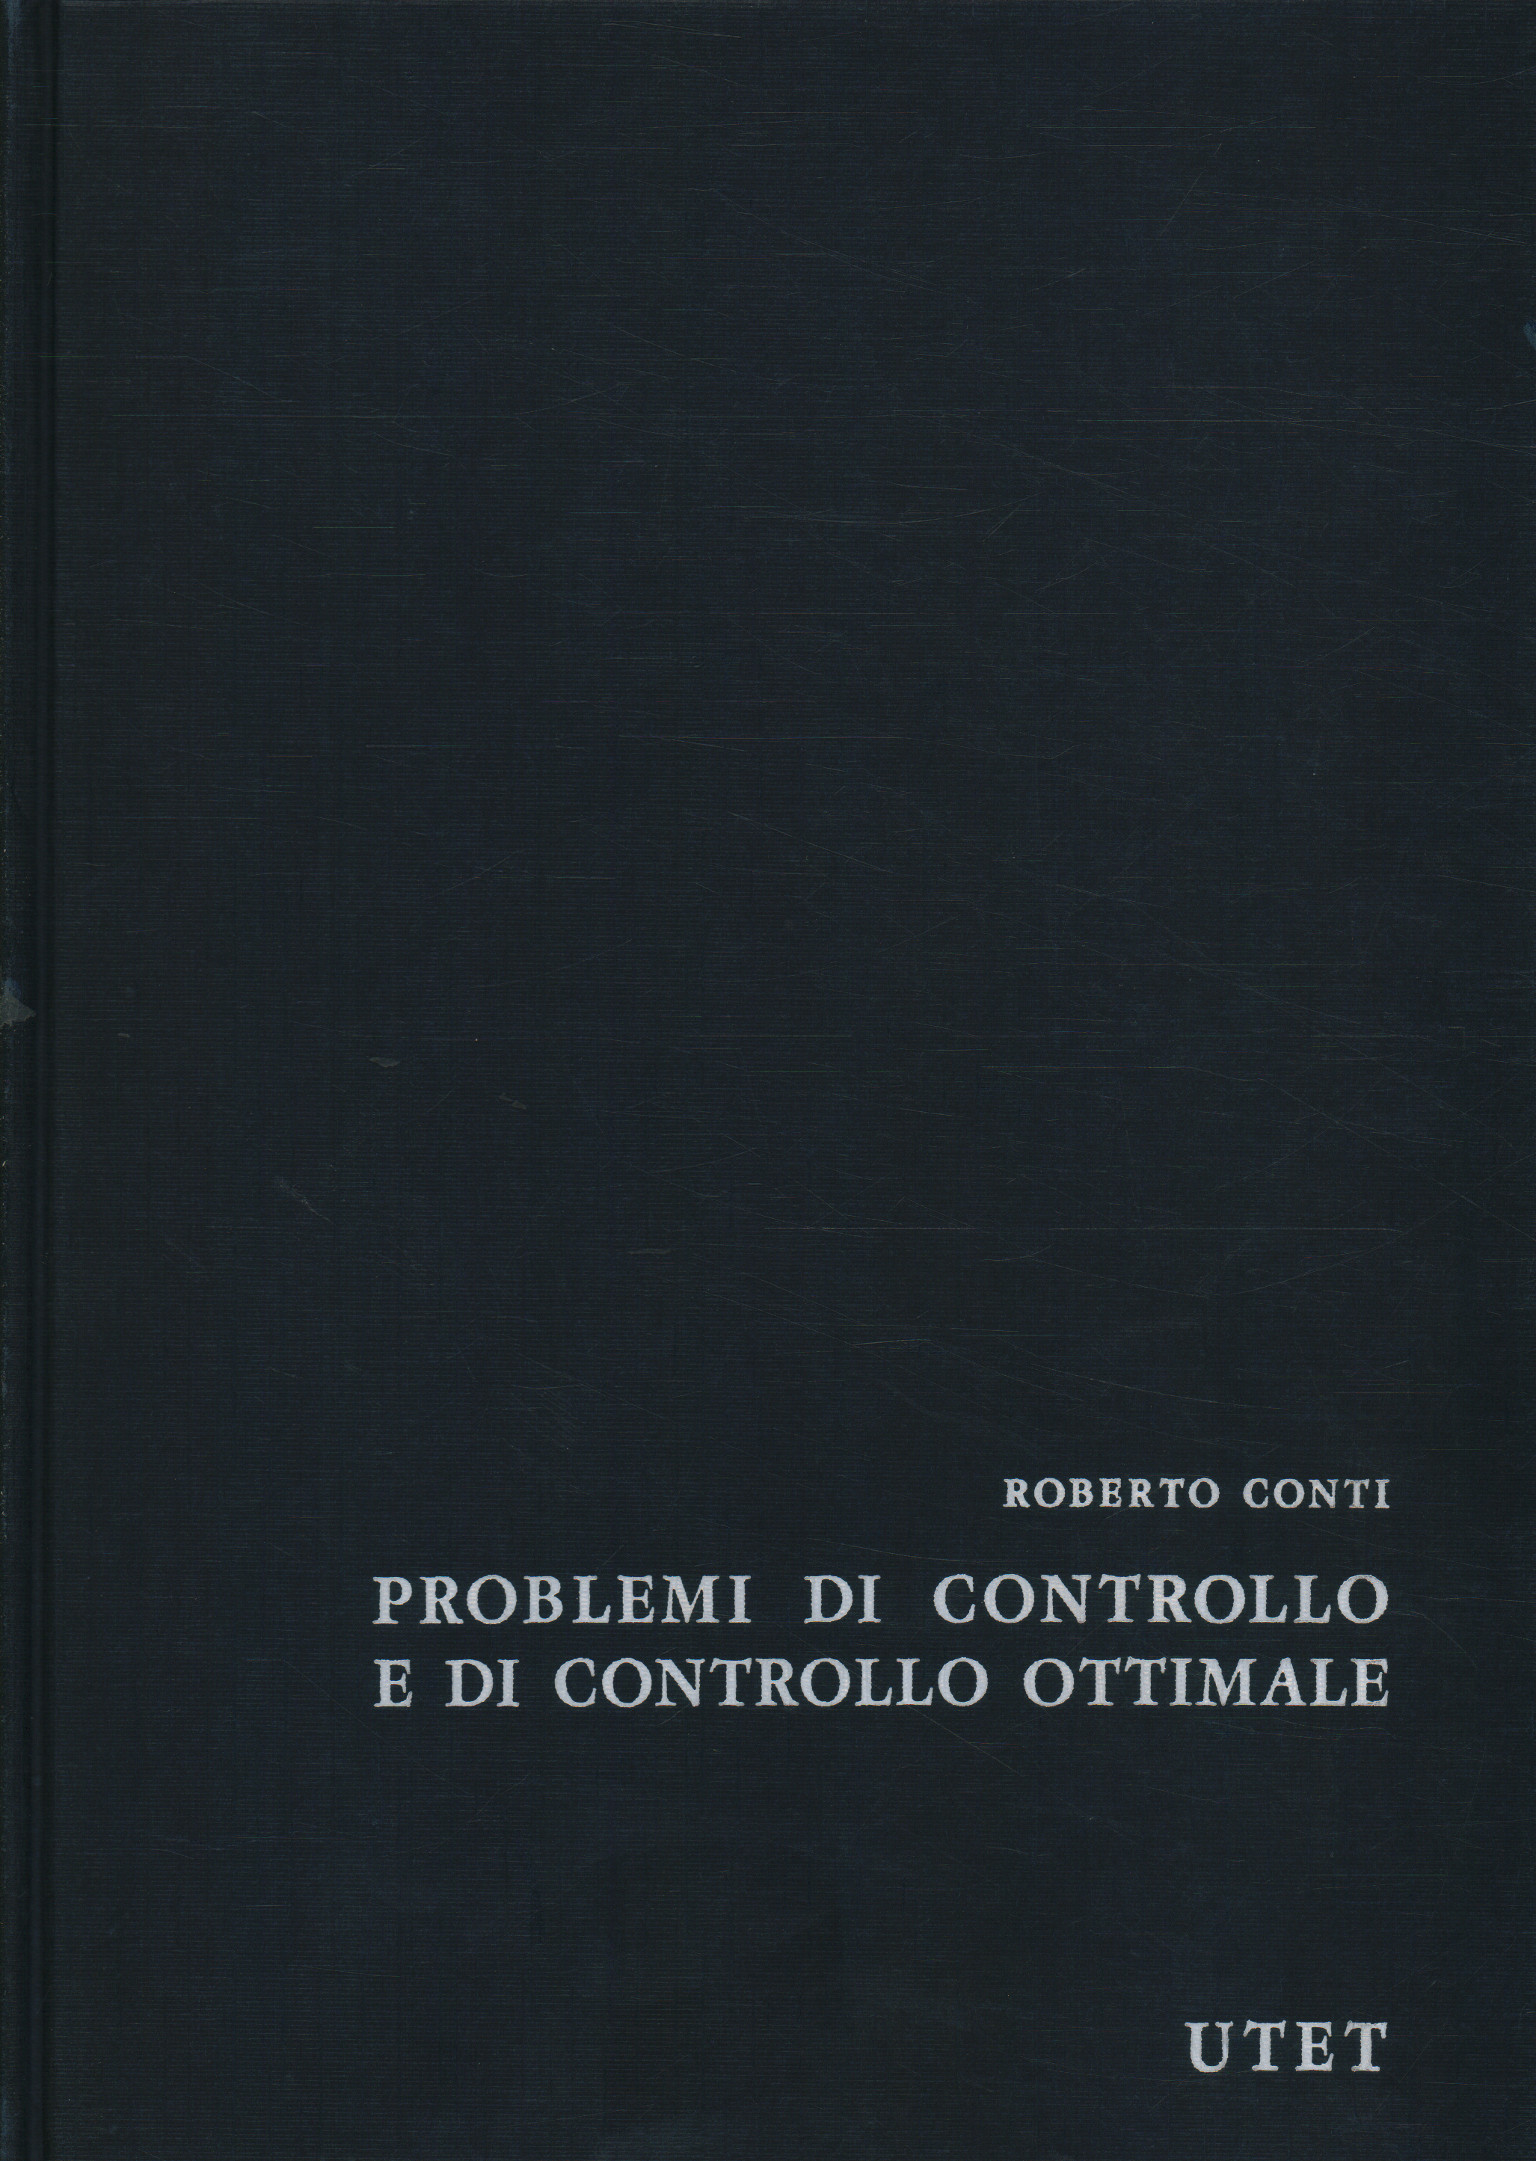 Control and control problems or